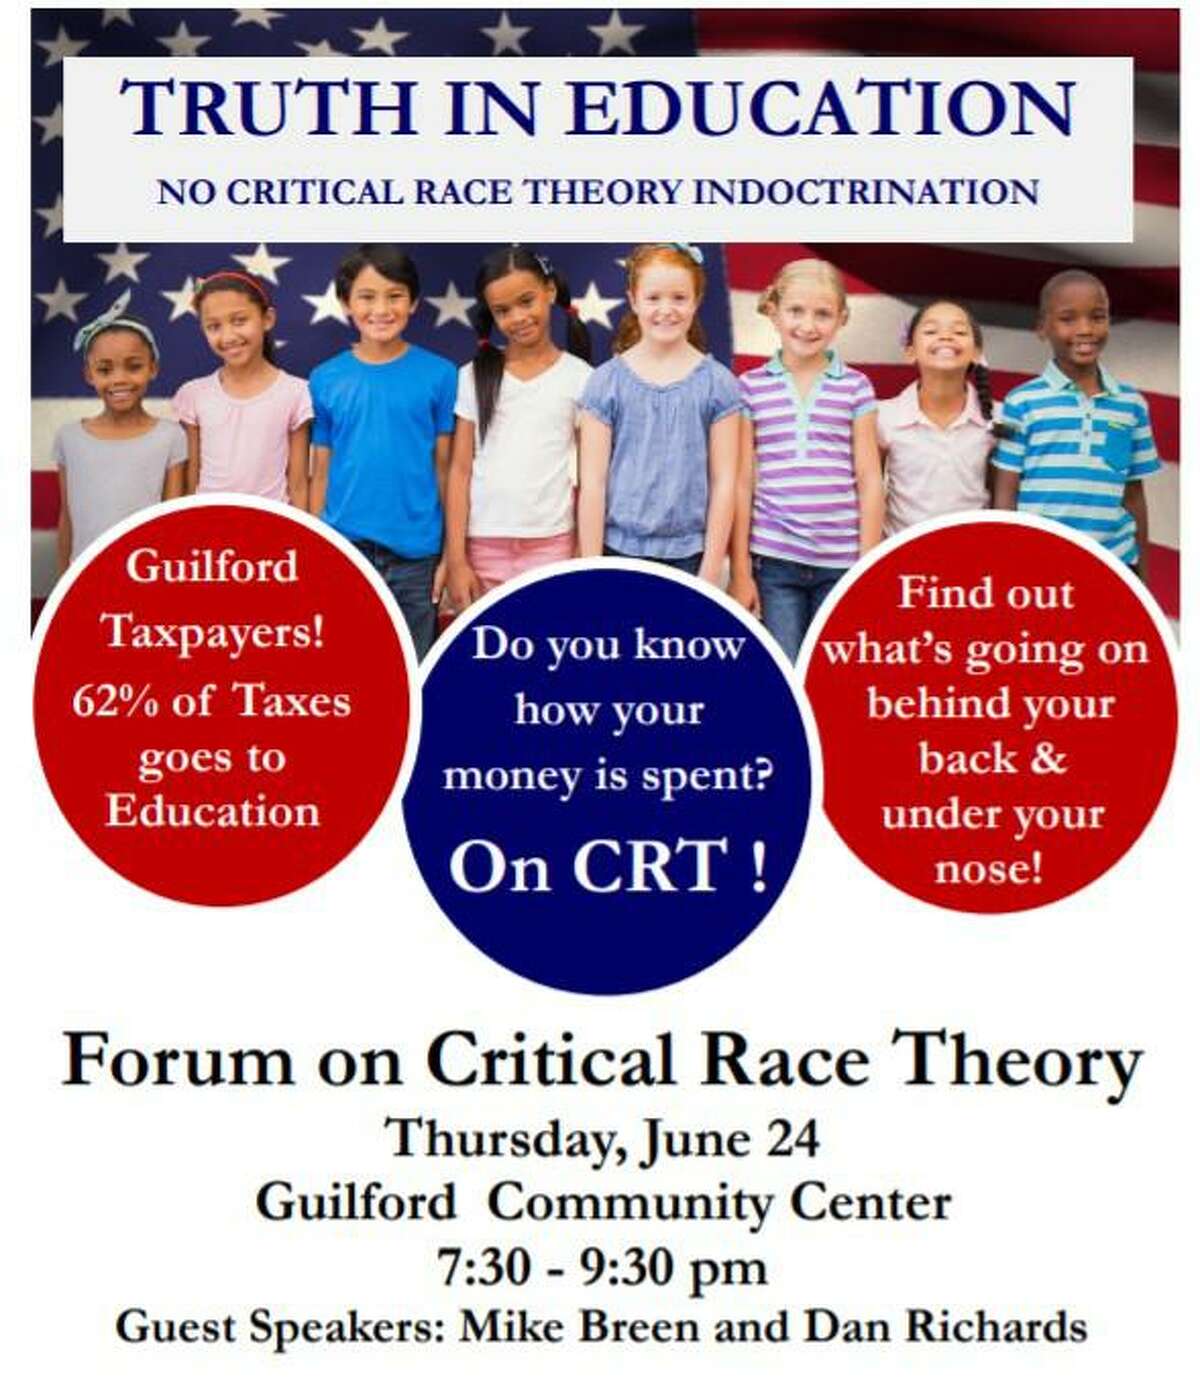 A poster for the forum on Thursday evening at the Guilford Community Center.